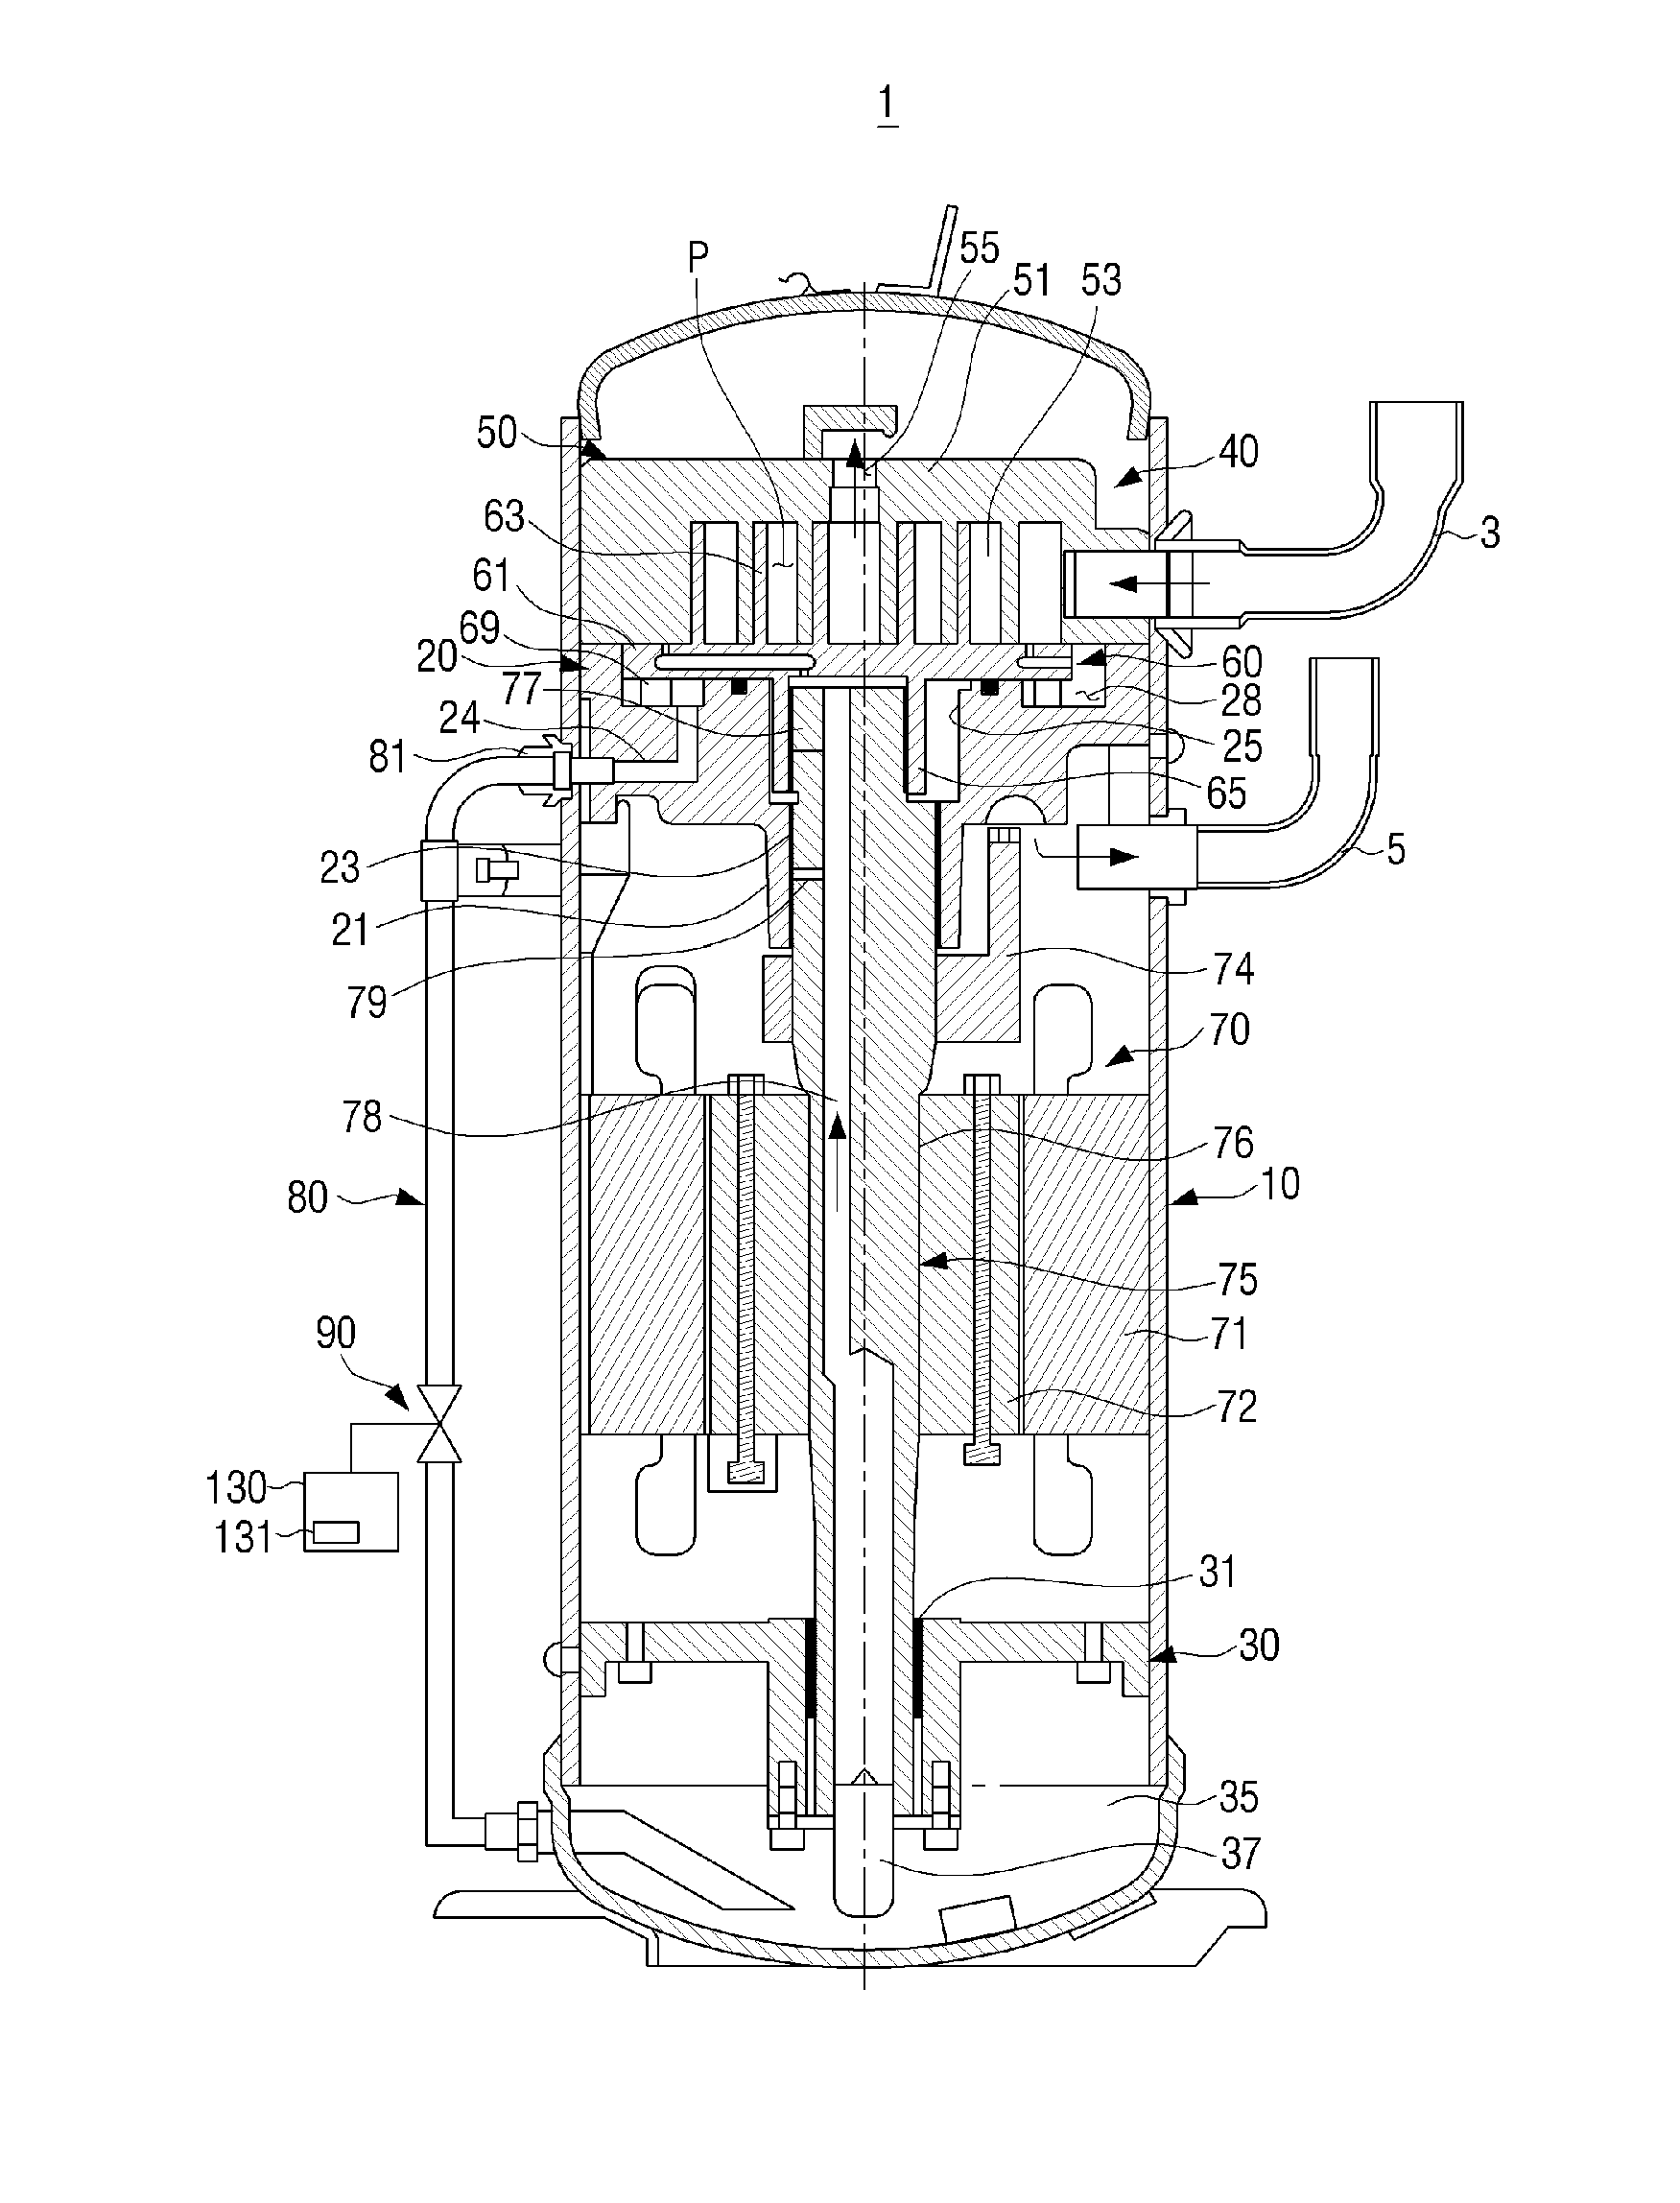 Scroll compressor and air conditioner having the same